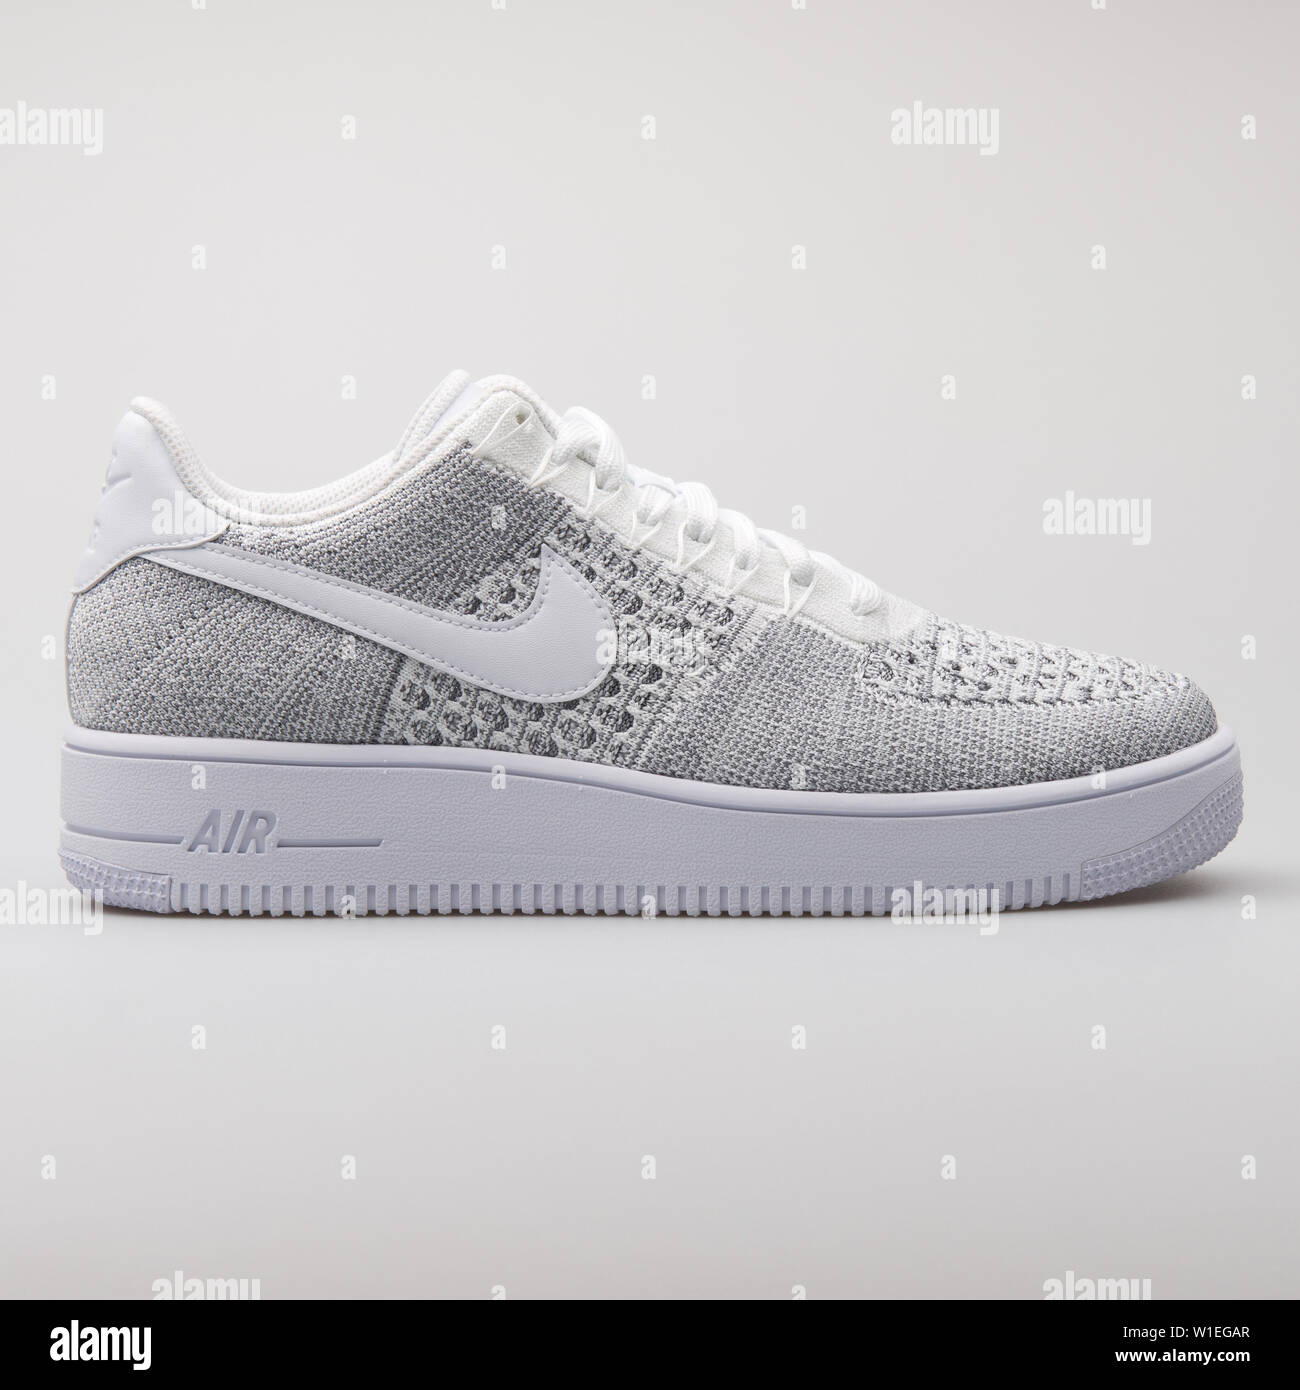 air force 1 flyknit low grey